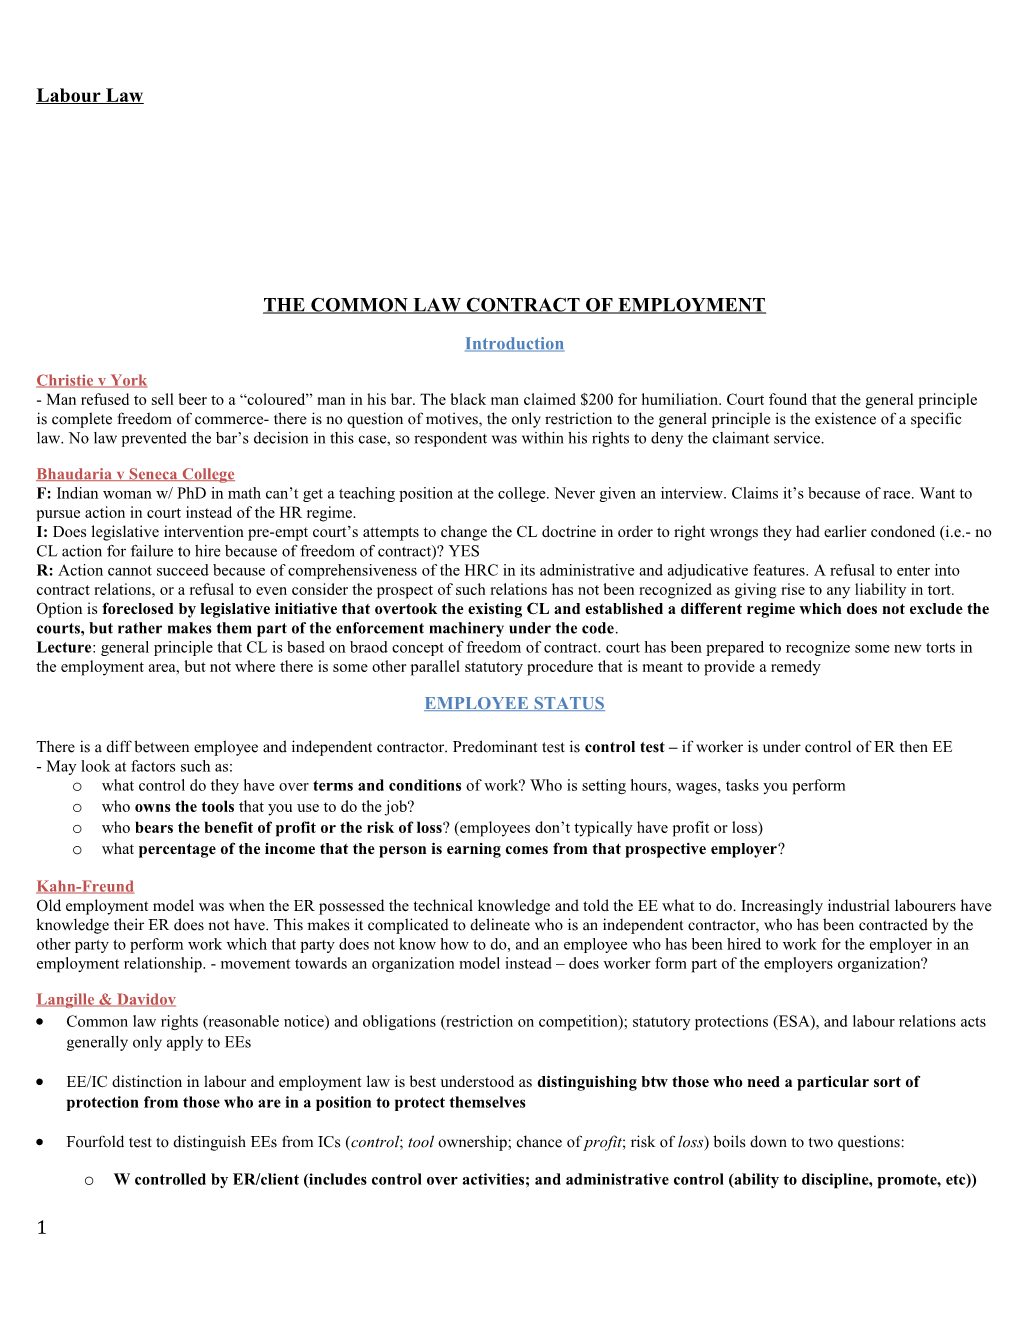 The Common Law Contract of Employment 4